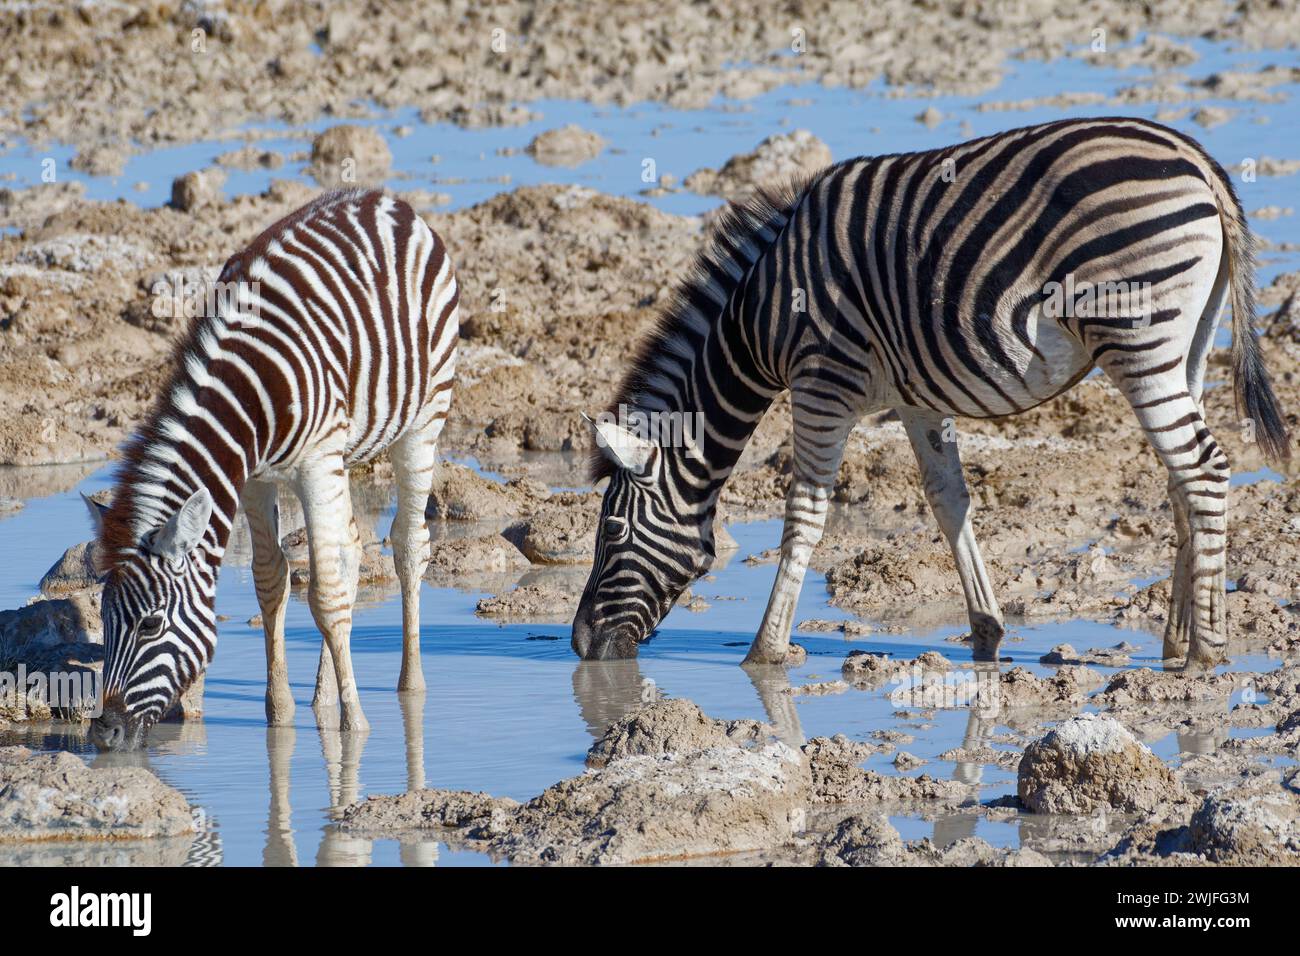 Burchell's zebras (Equus quagga burchellii), adult with zebra foal in water, drinking at the waterhole, Etosha National Park, Namibia, Africa Stock Photo